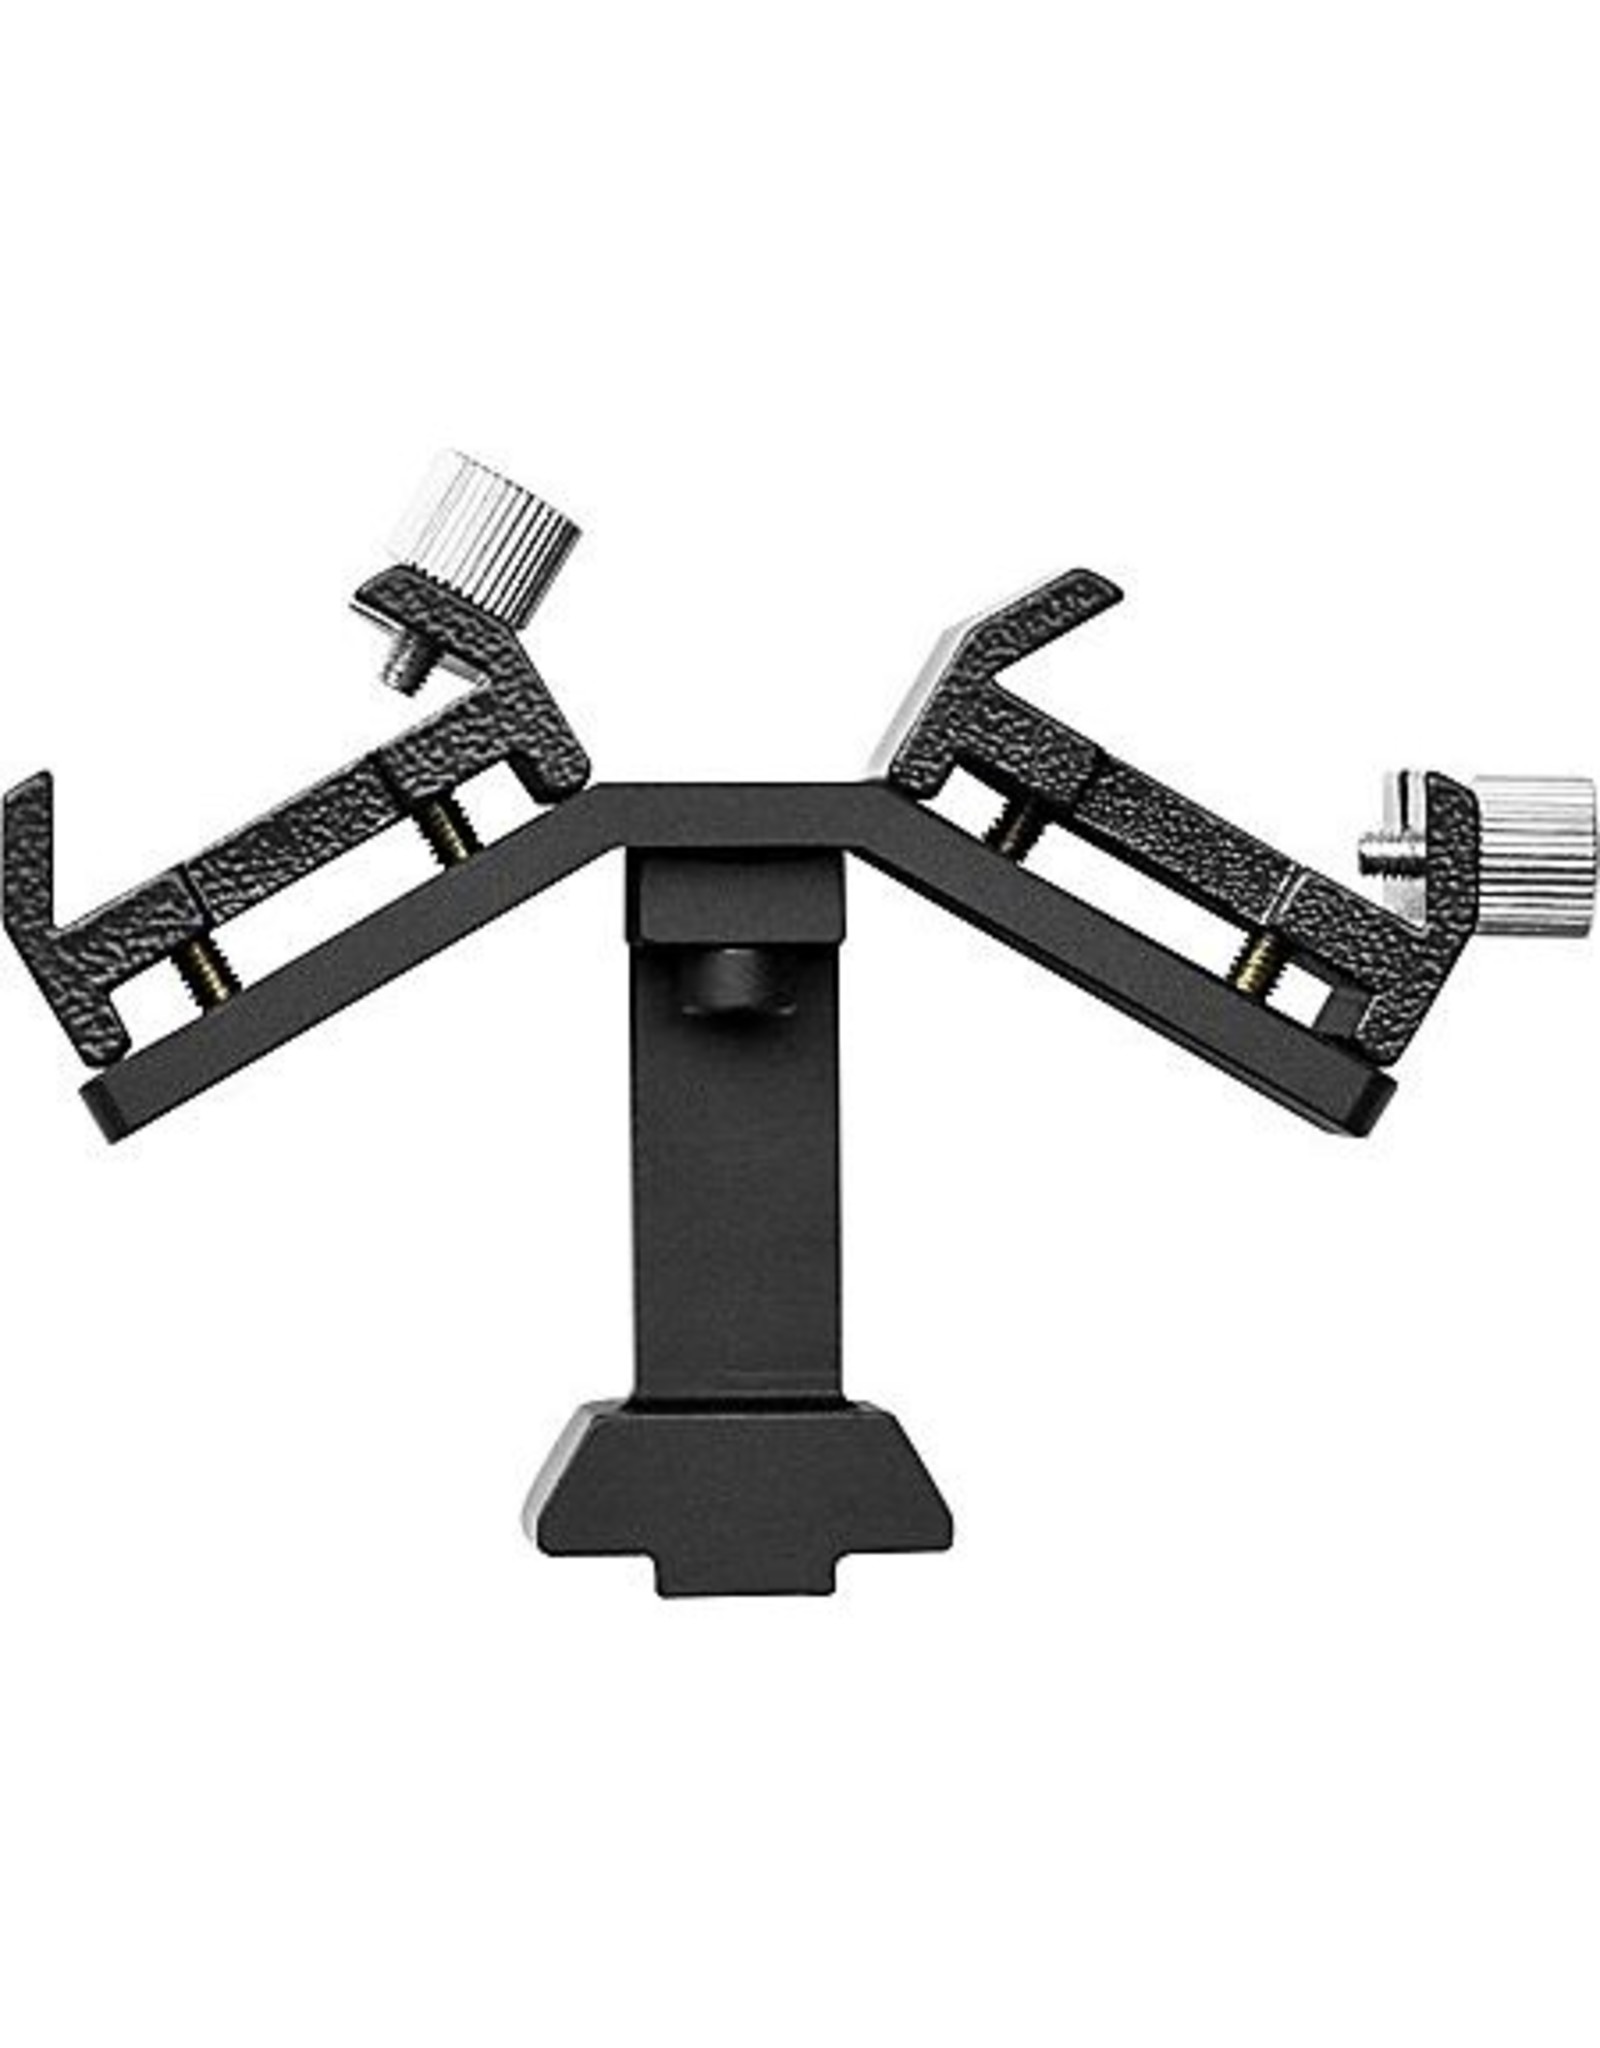 Orion Orion Dual Finder Scope Mounting Bracket